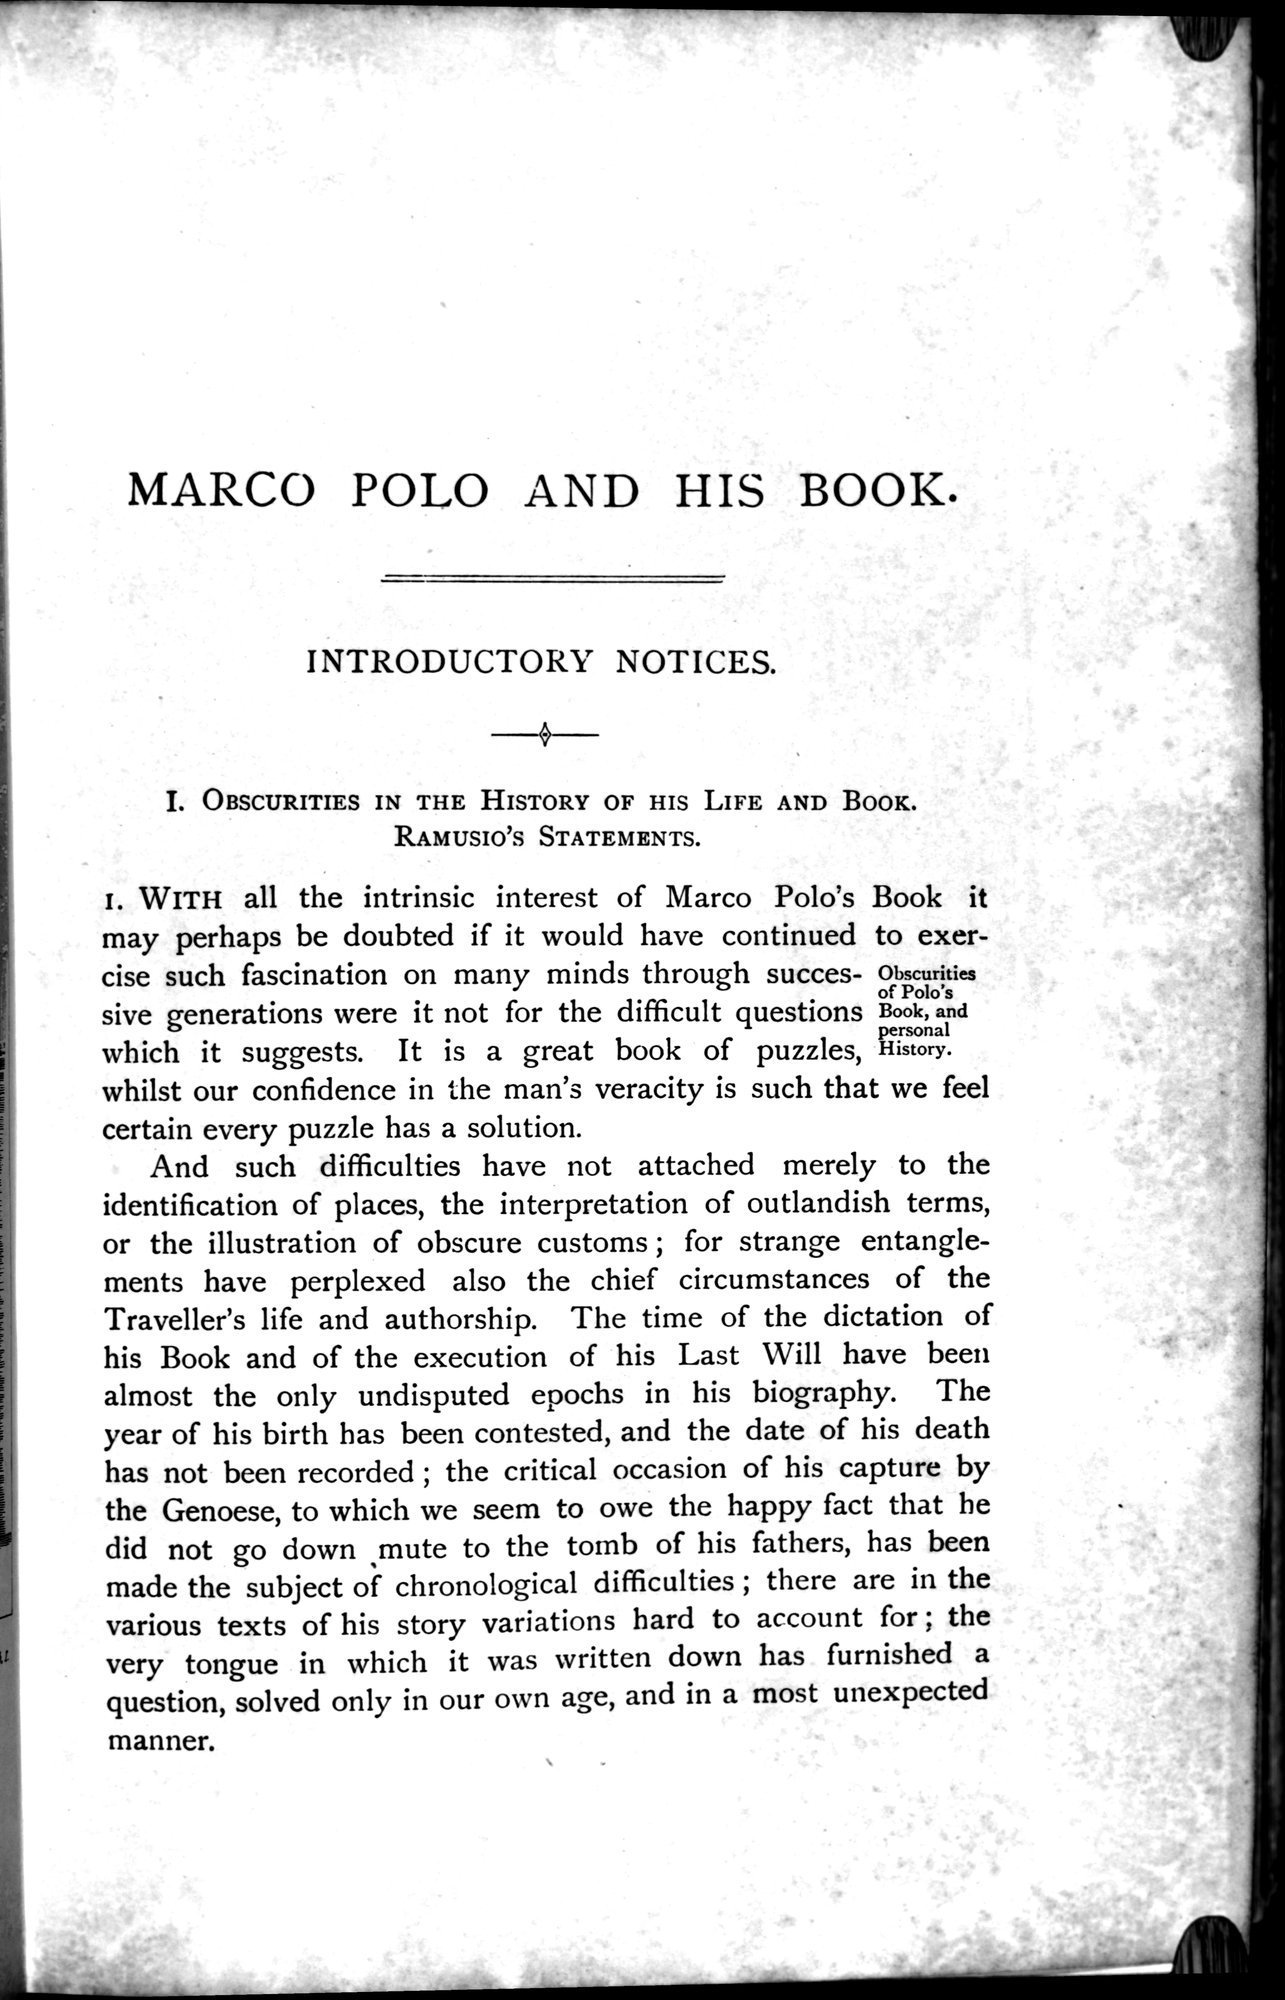 The Book of Ser Marco Polo : vol.1 / 115 ページ（白黒高解像度画像）